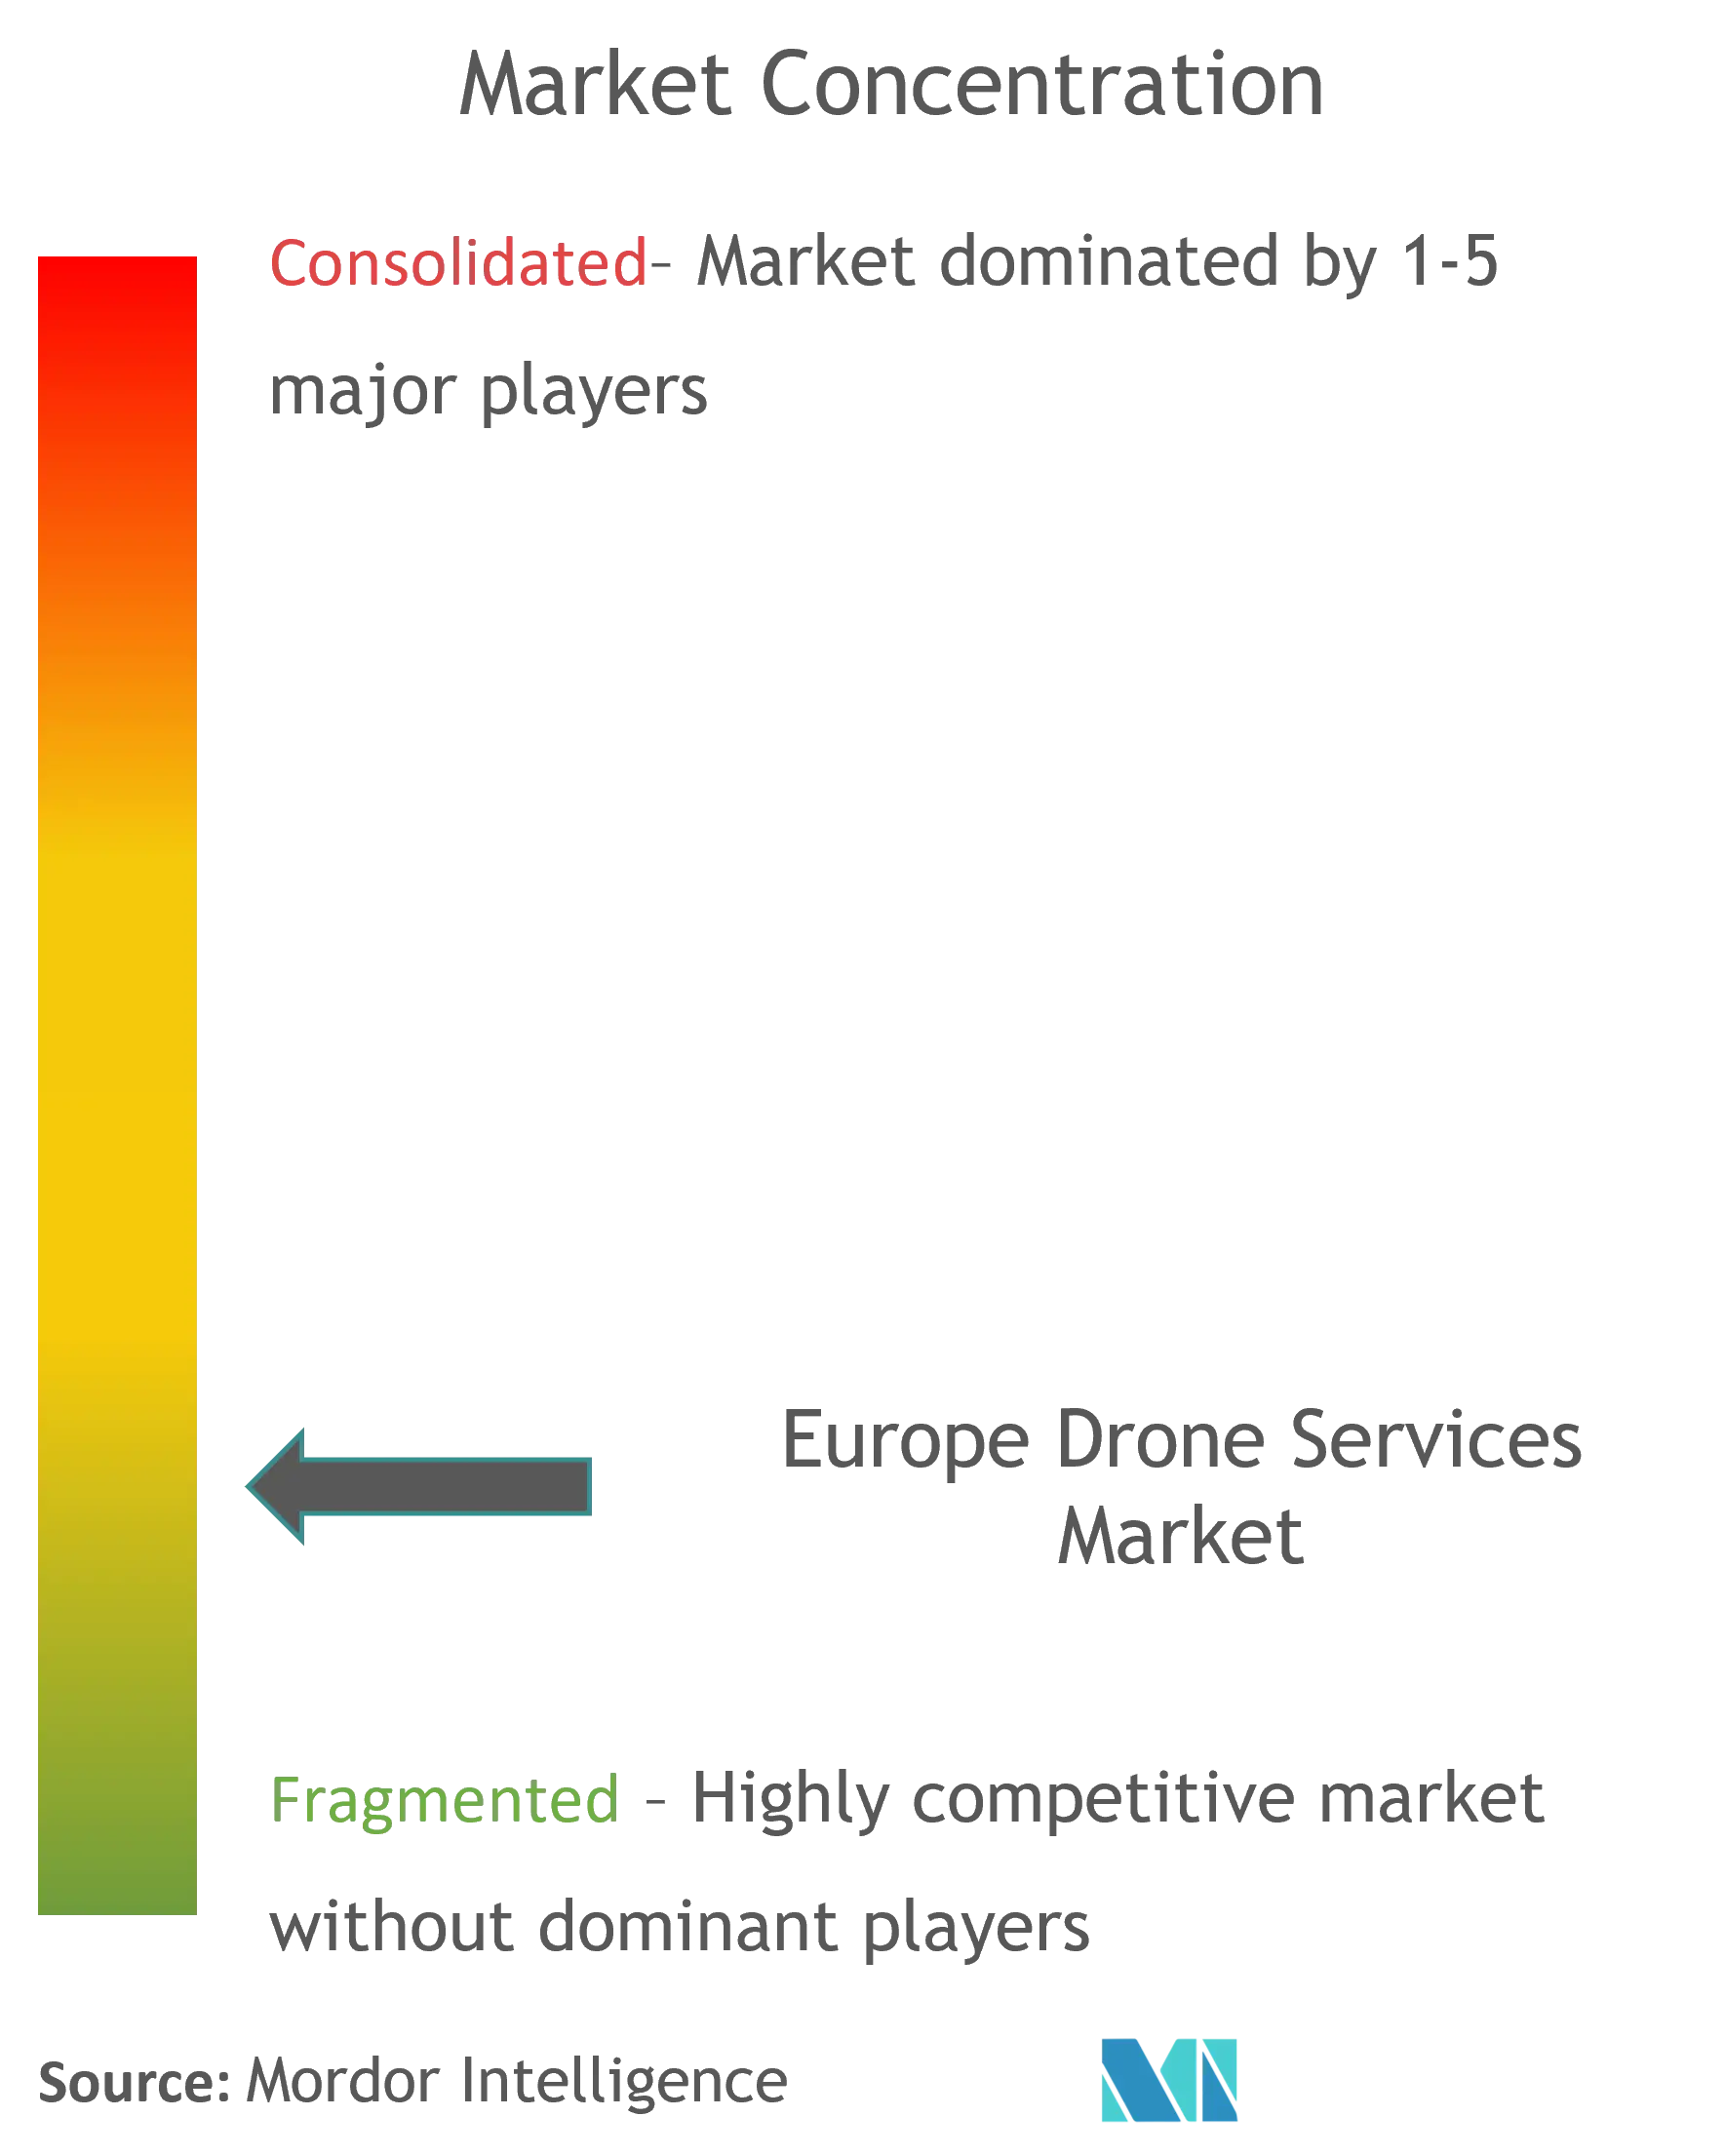 europe drone services market updated CL.png